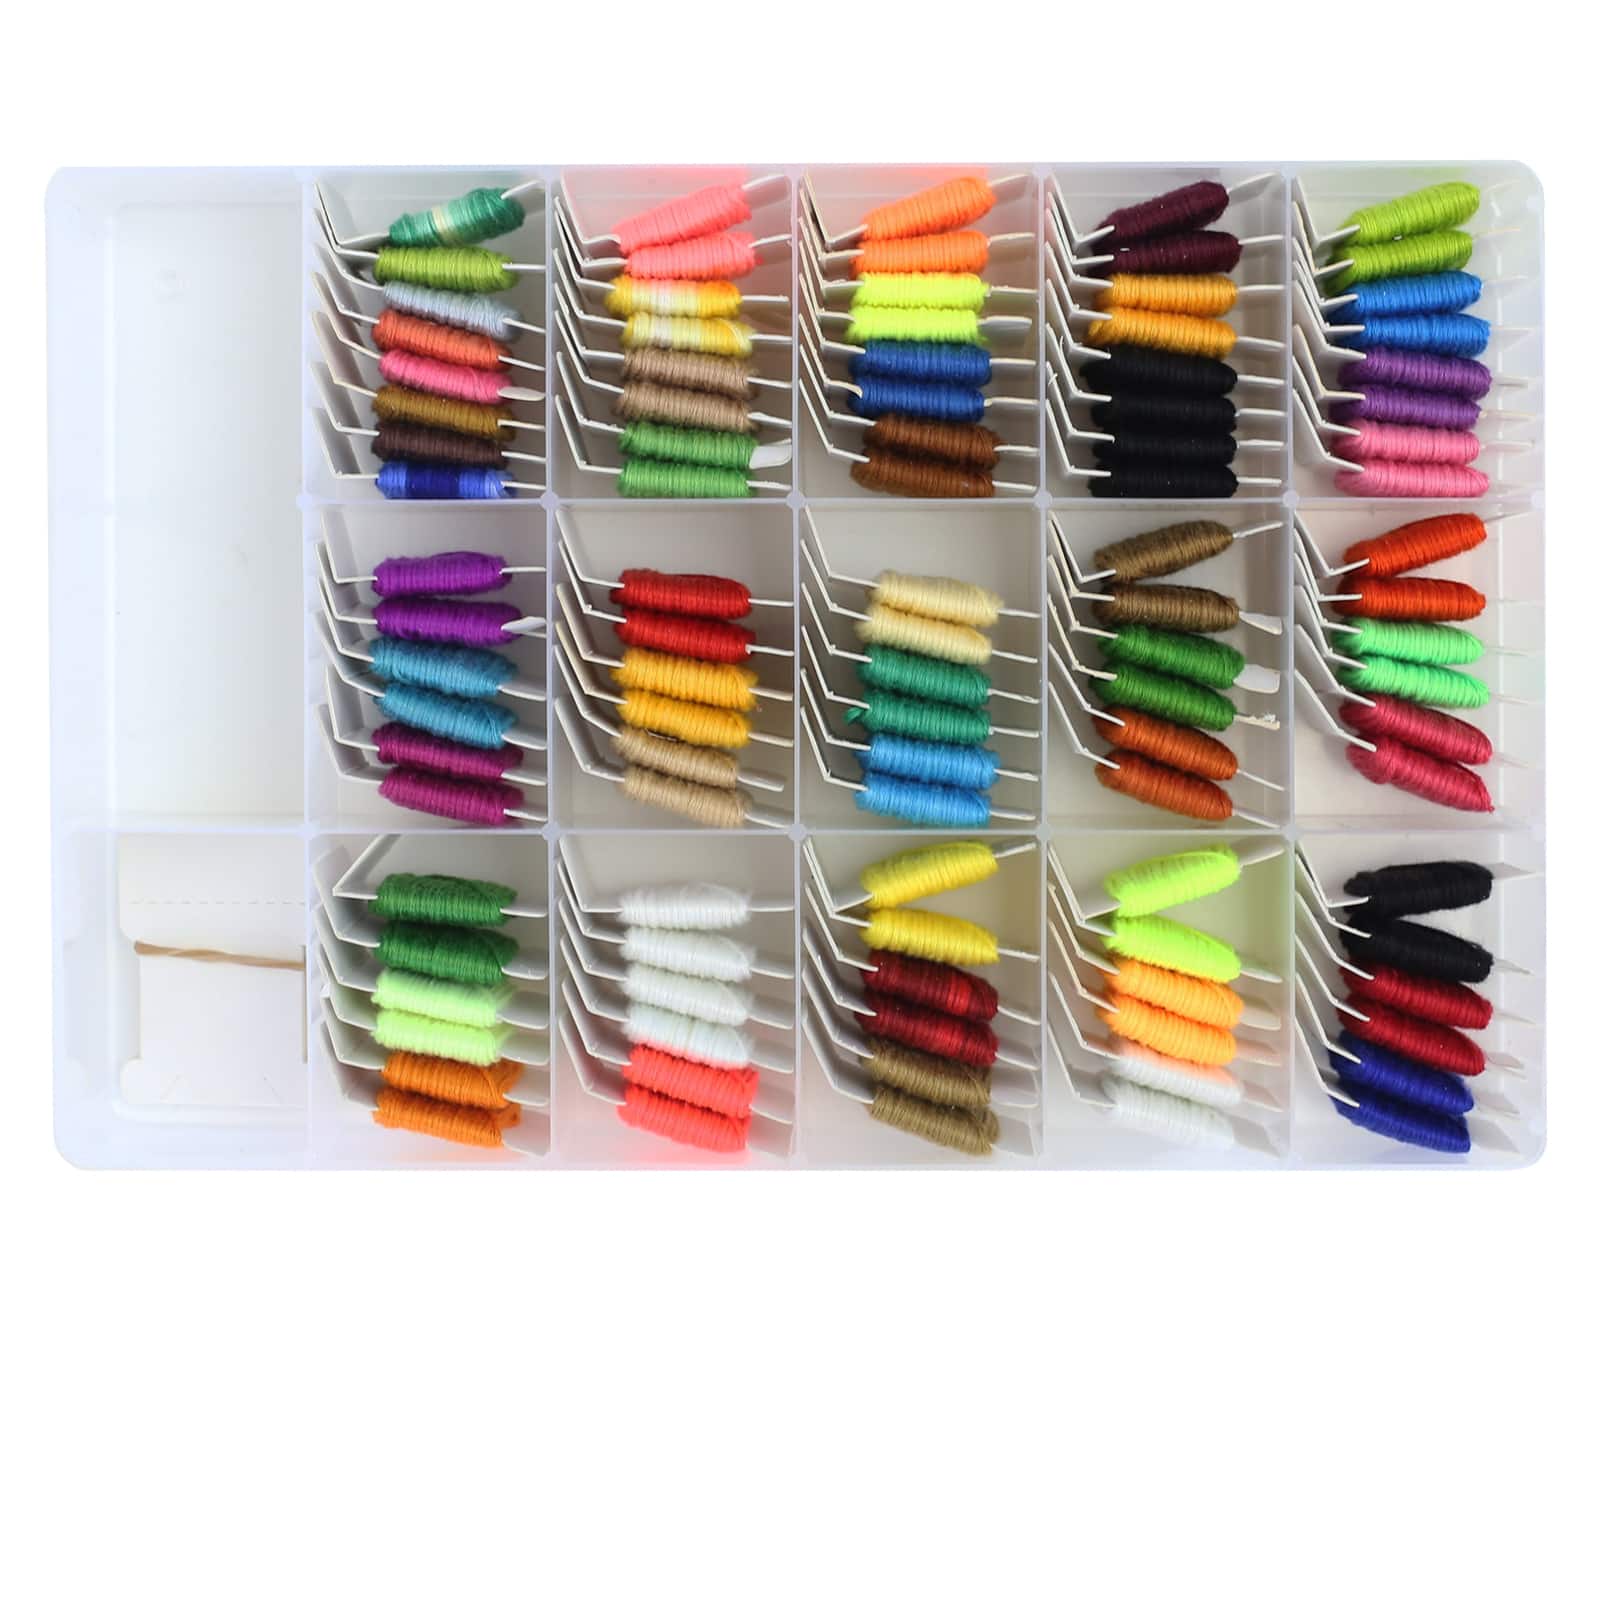 Loops & Threads Embroidery Floss Organizer Kit - Each